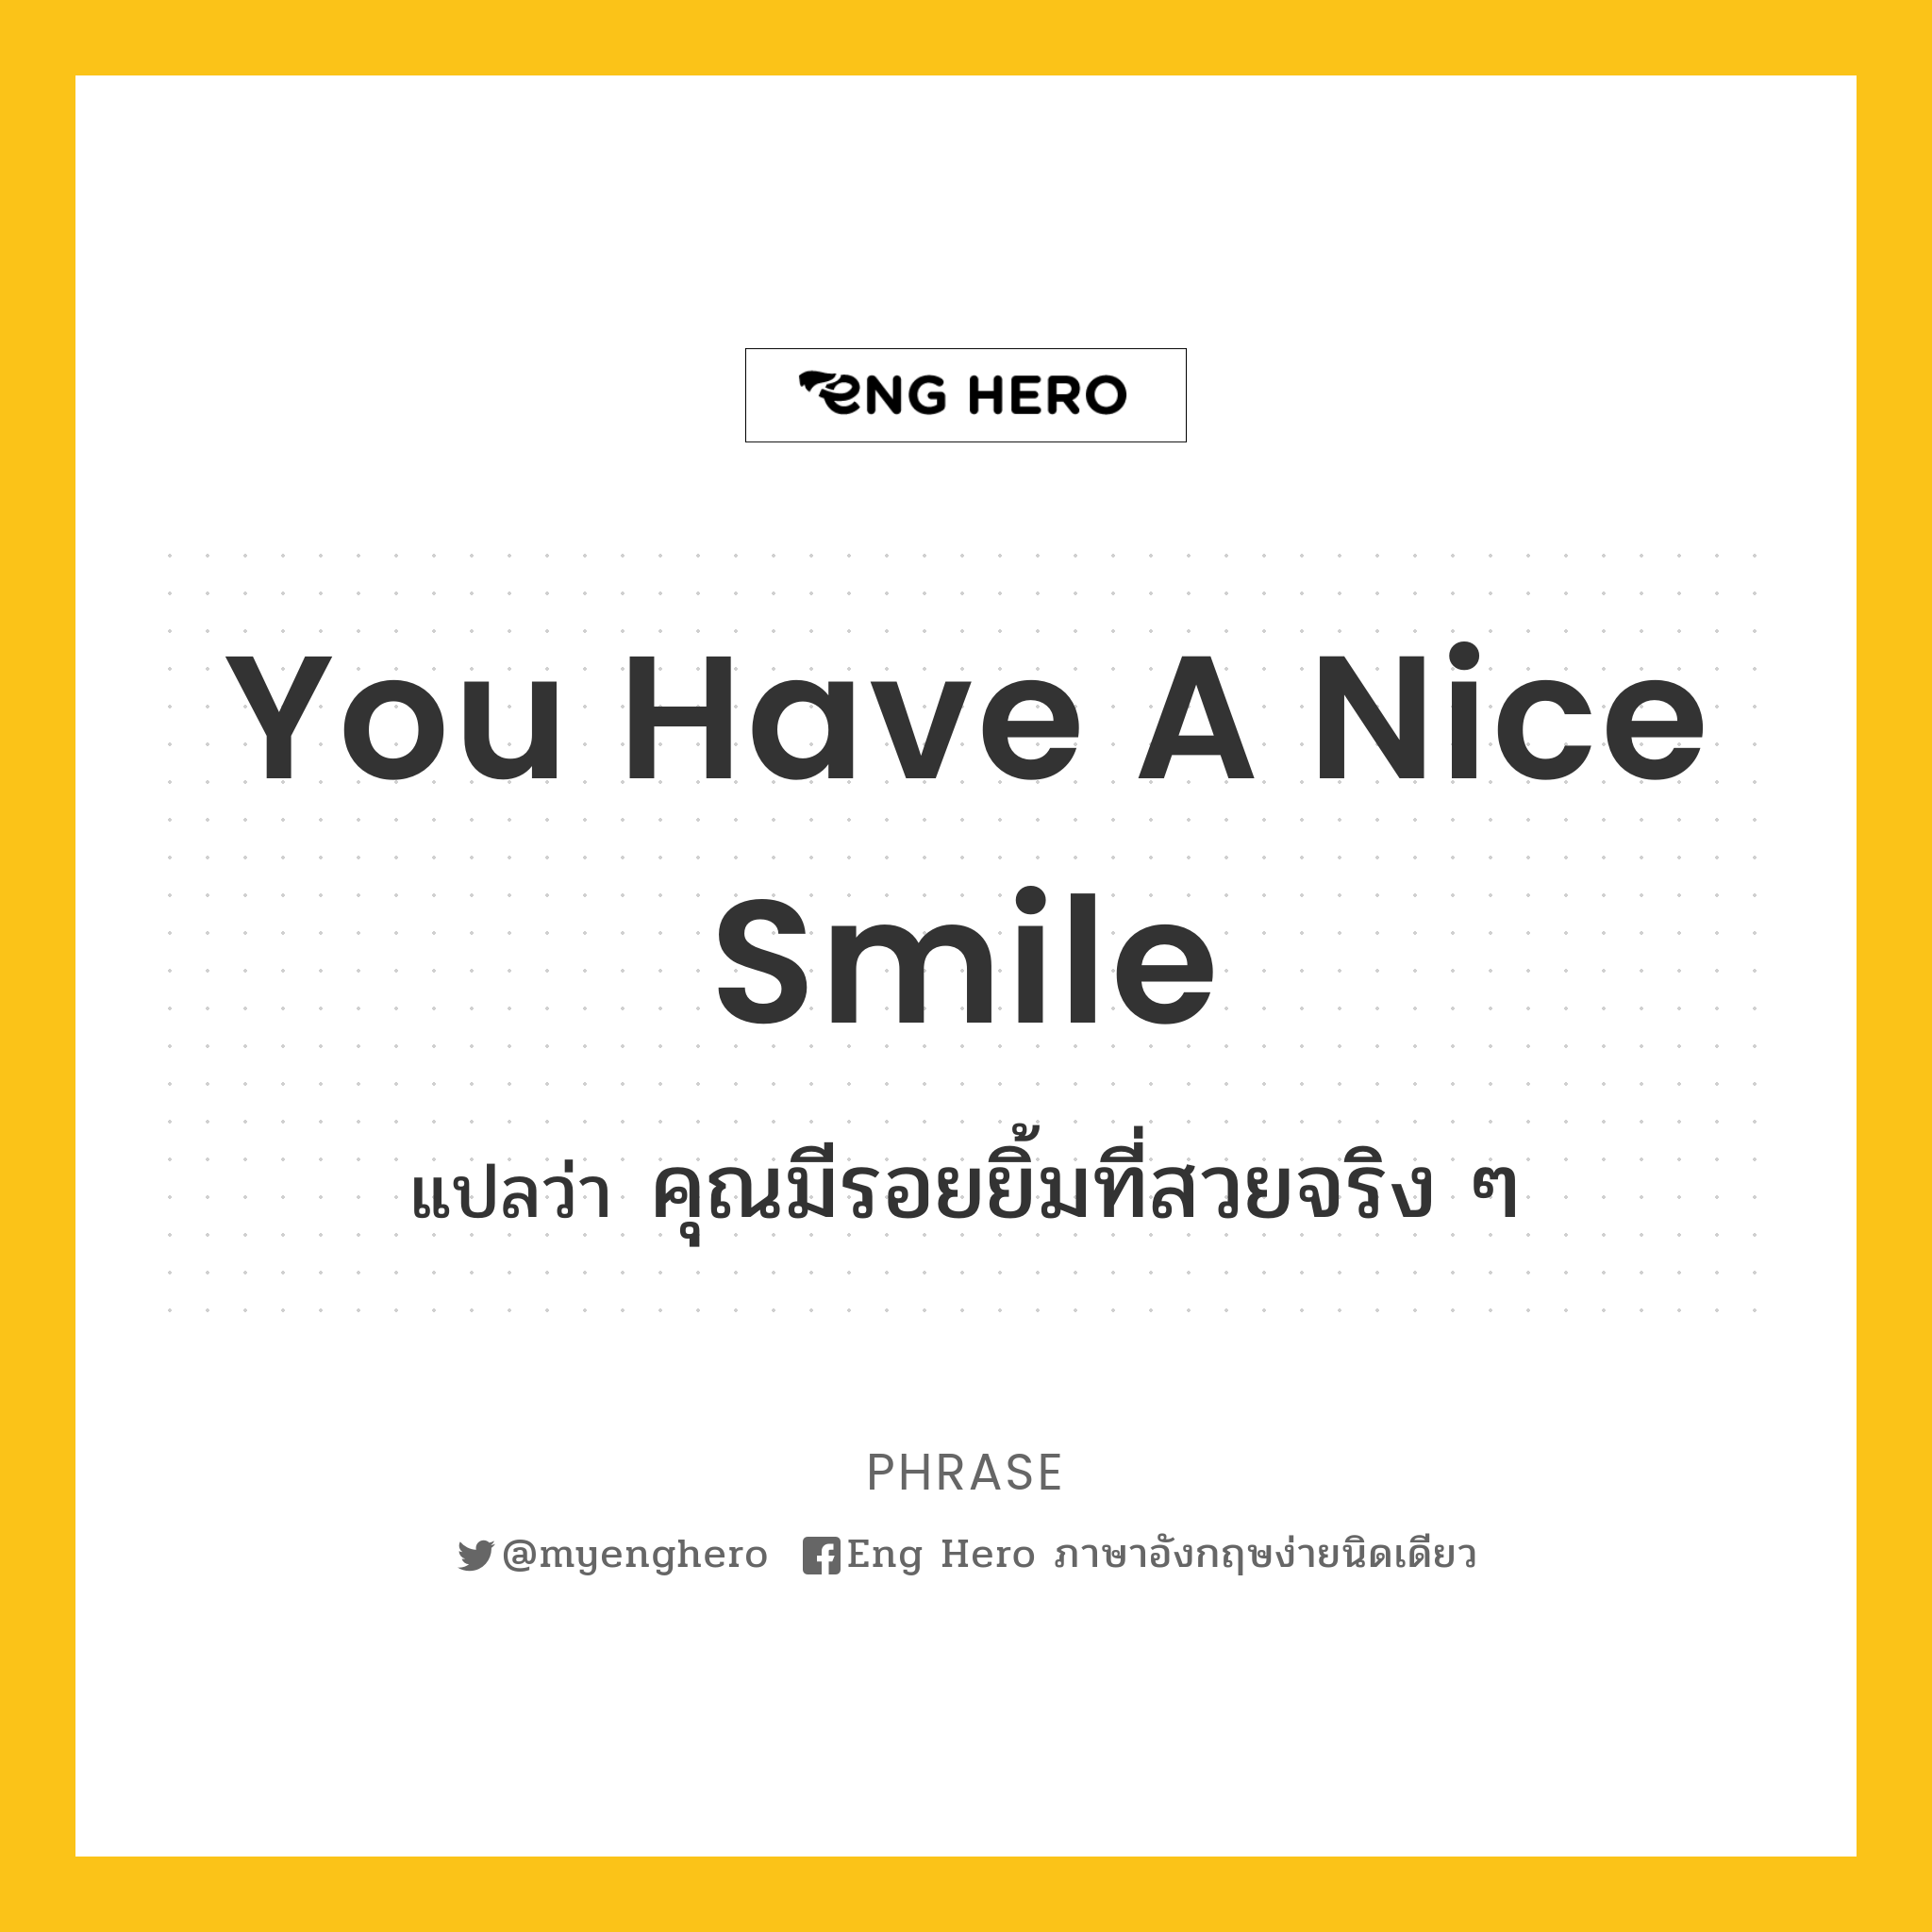 You have a nice smile